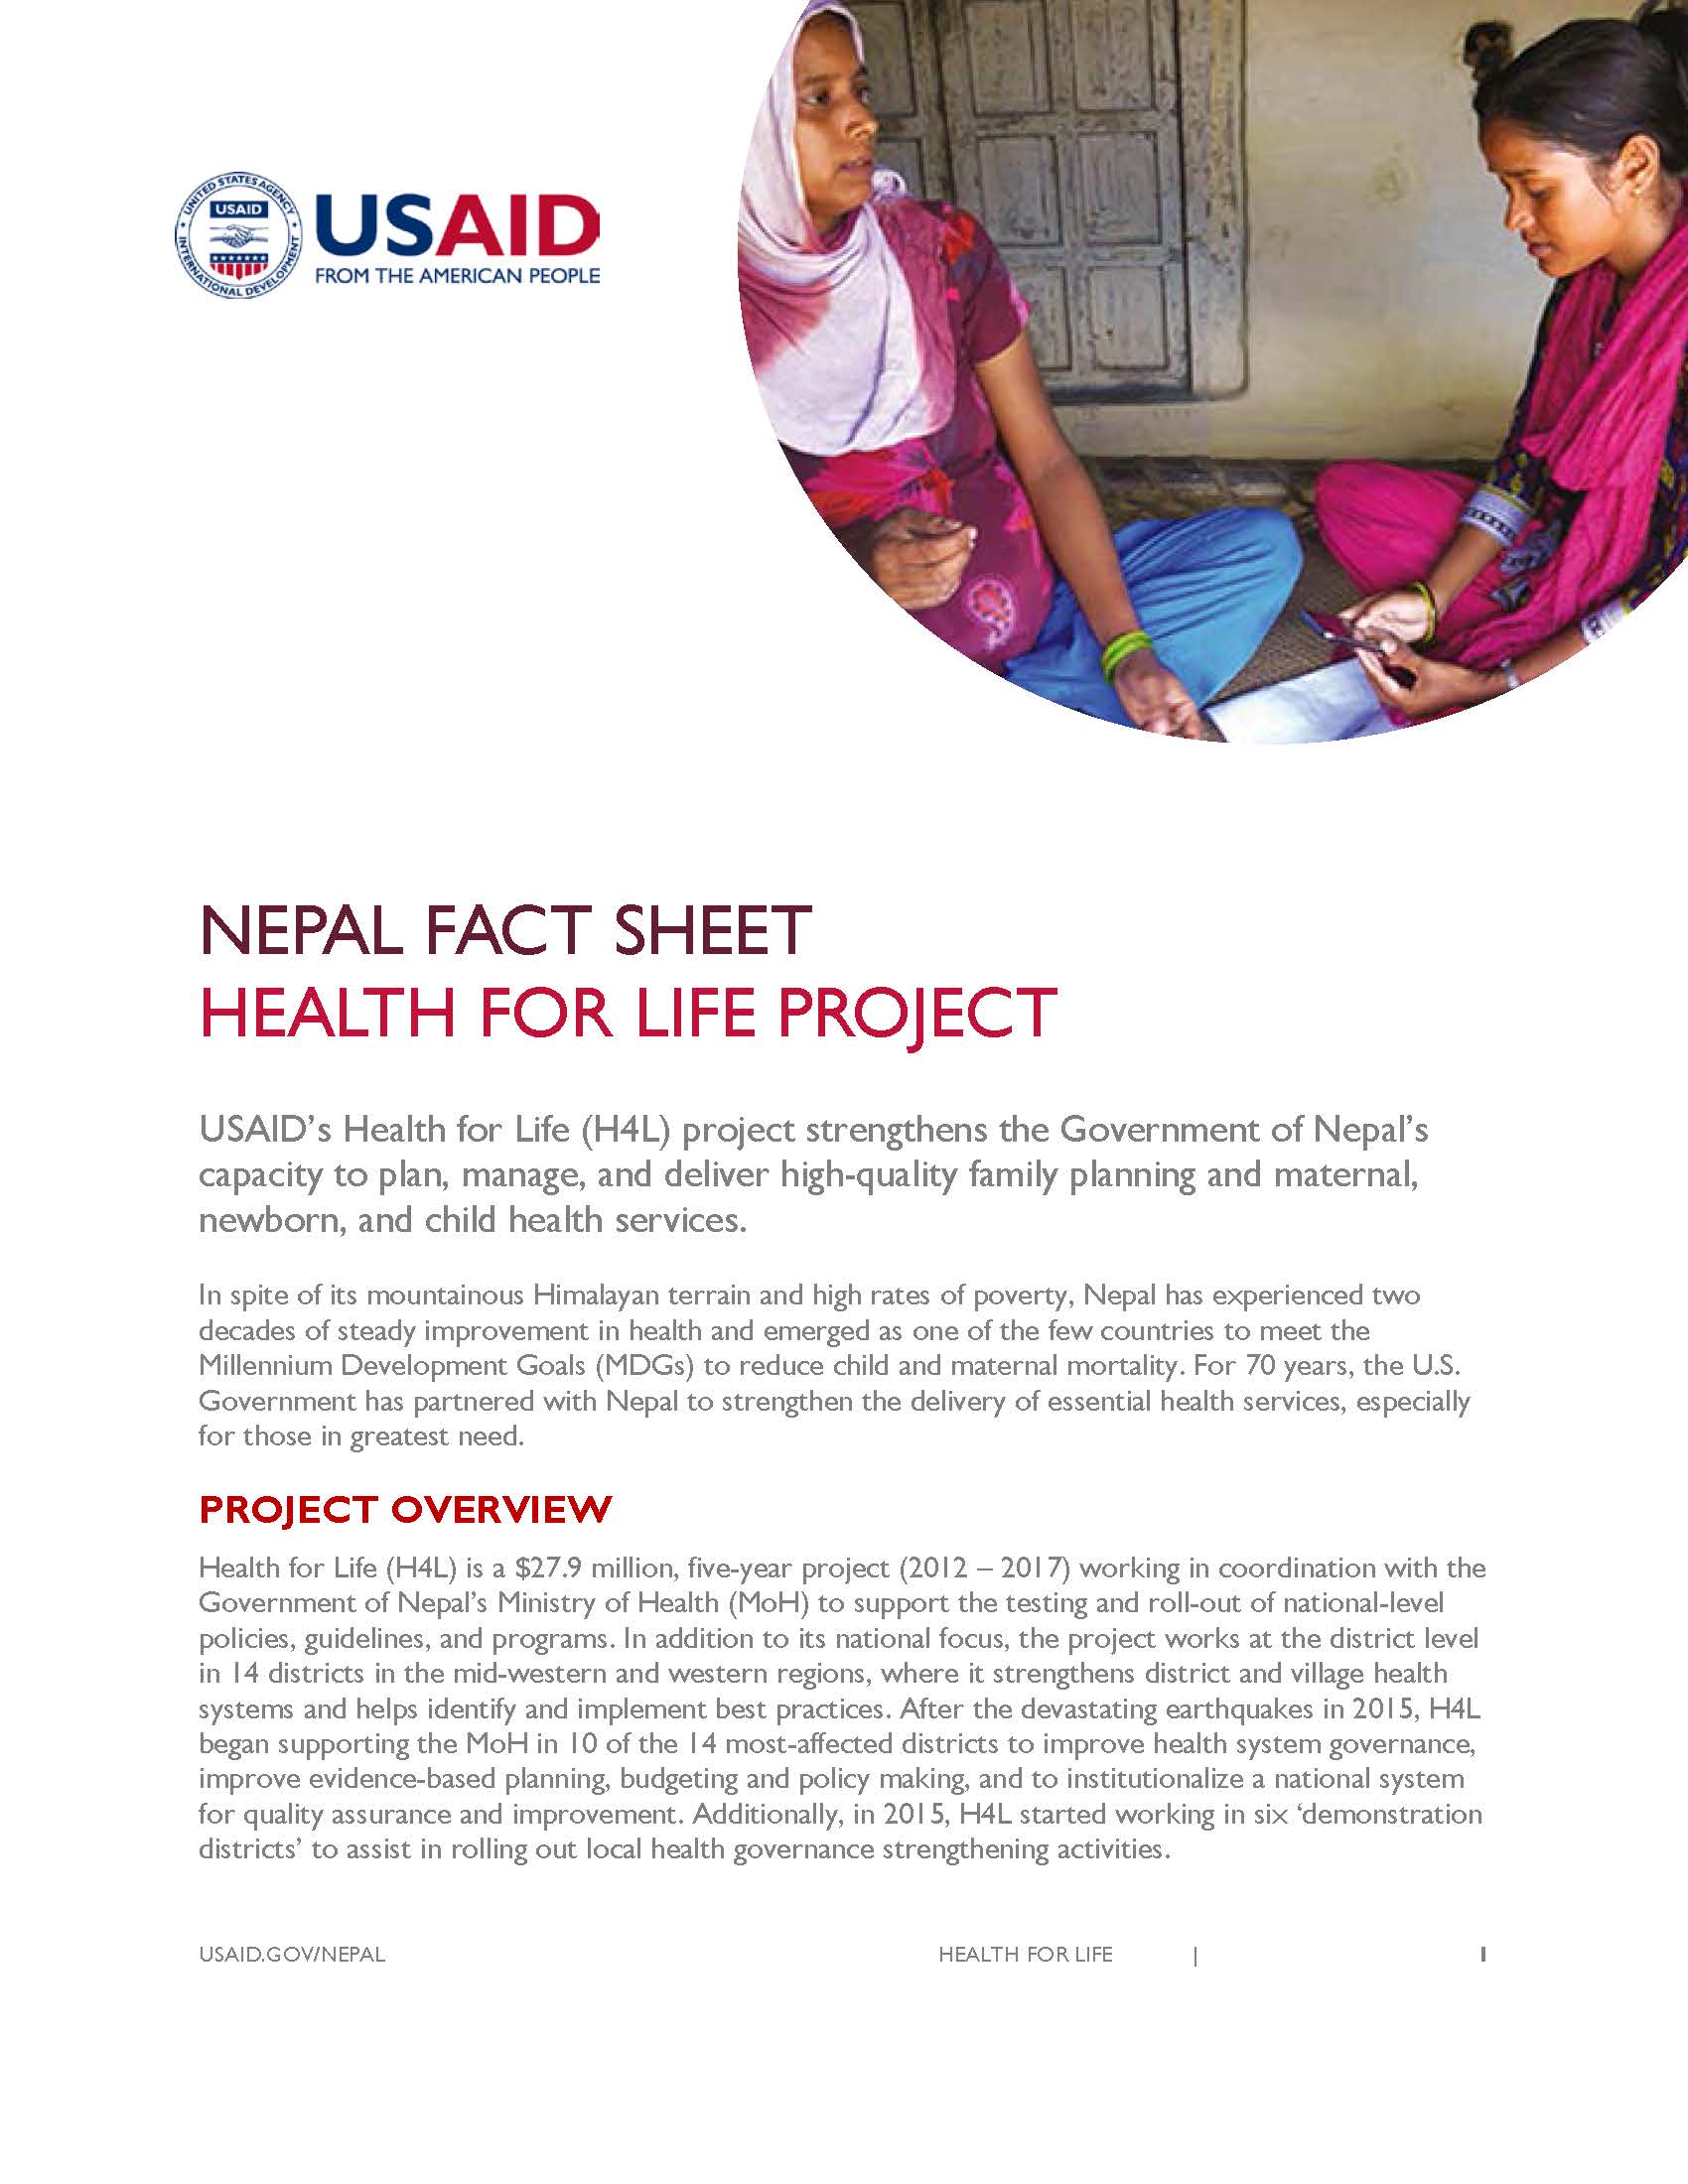 Fact Sheet: HEALTH FOR LIFE PROJECT